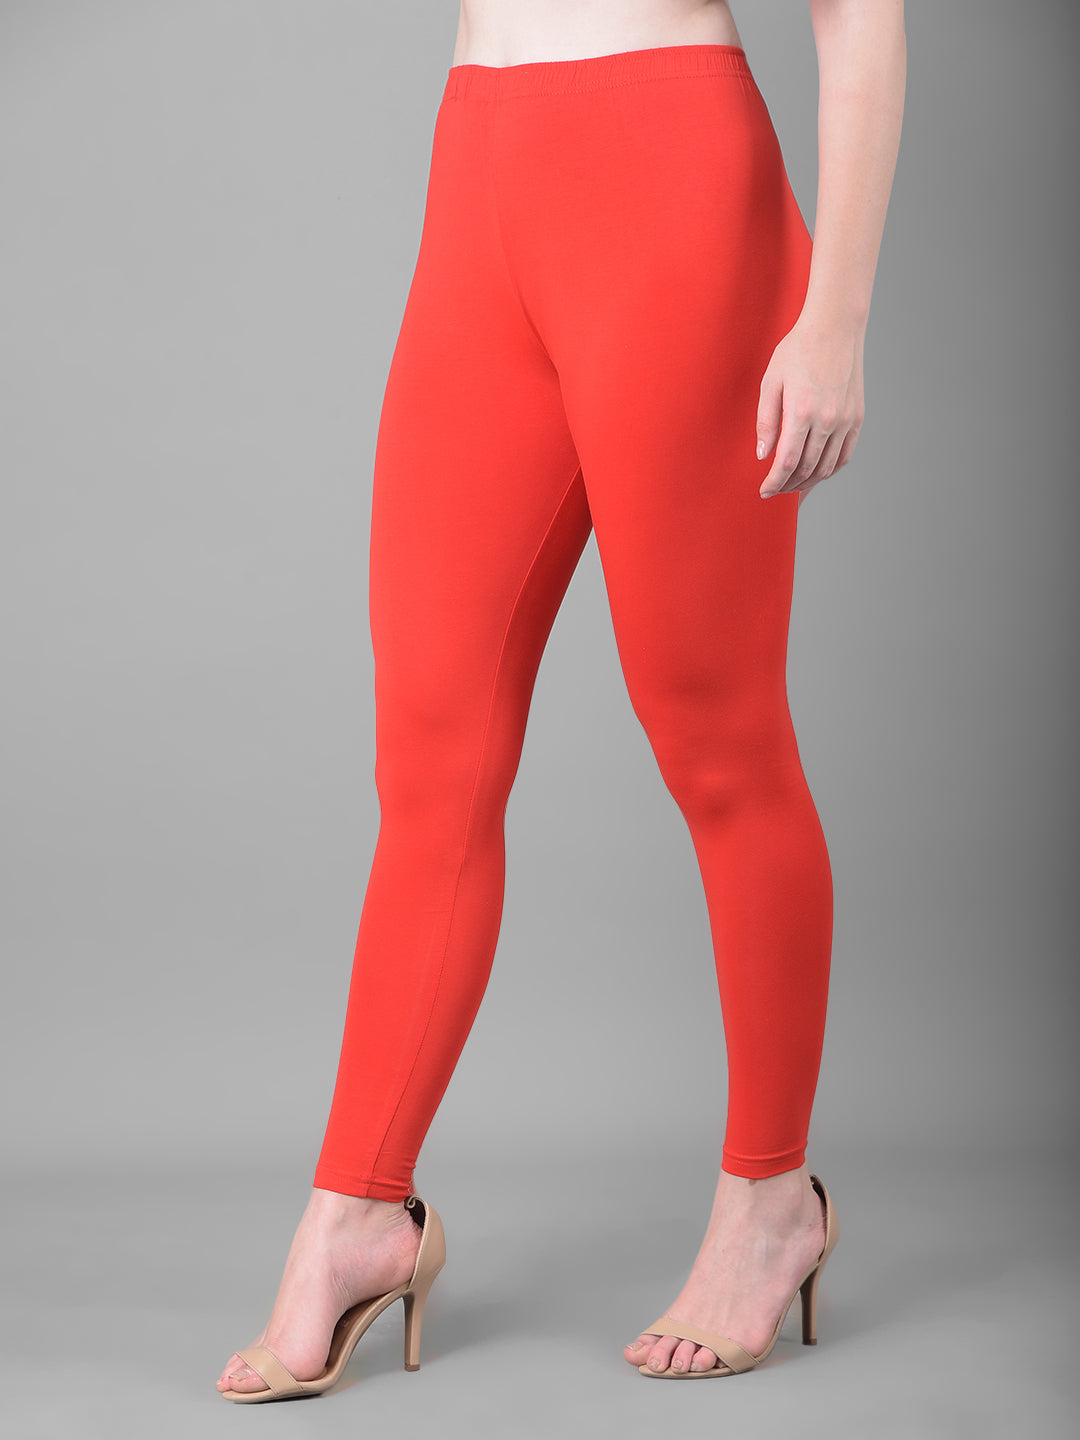 Comfort Lady Legging Price Starting From Rs 353. Find Verified Sellers in  Pune - JdMart